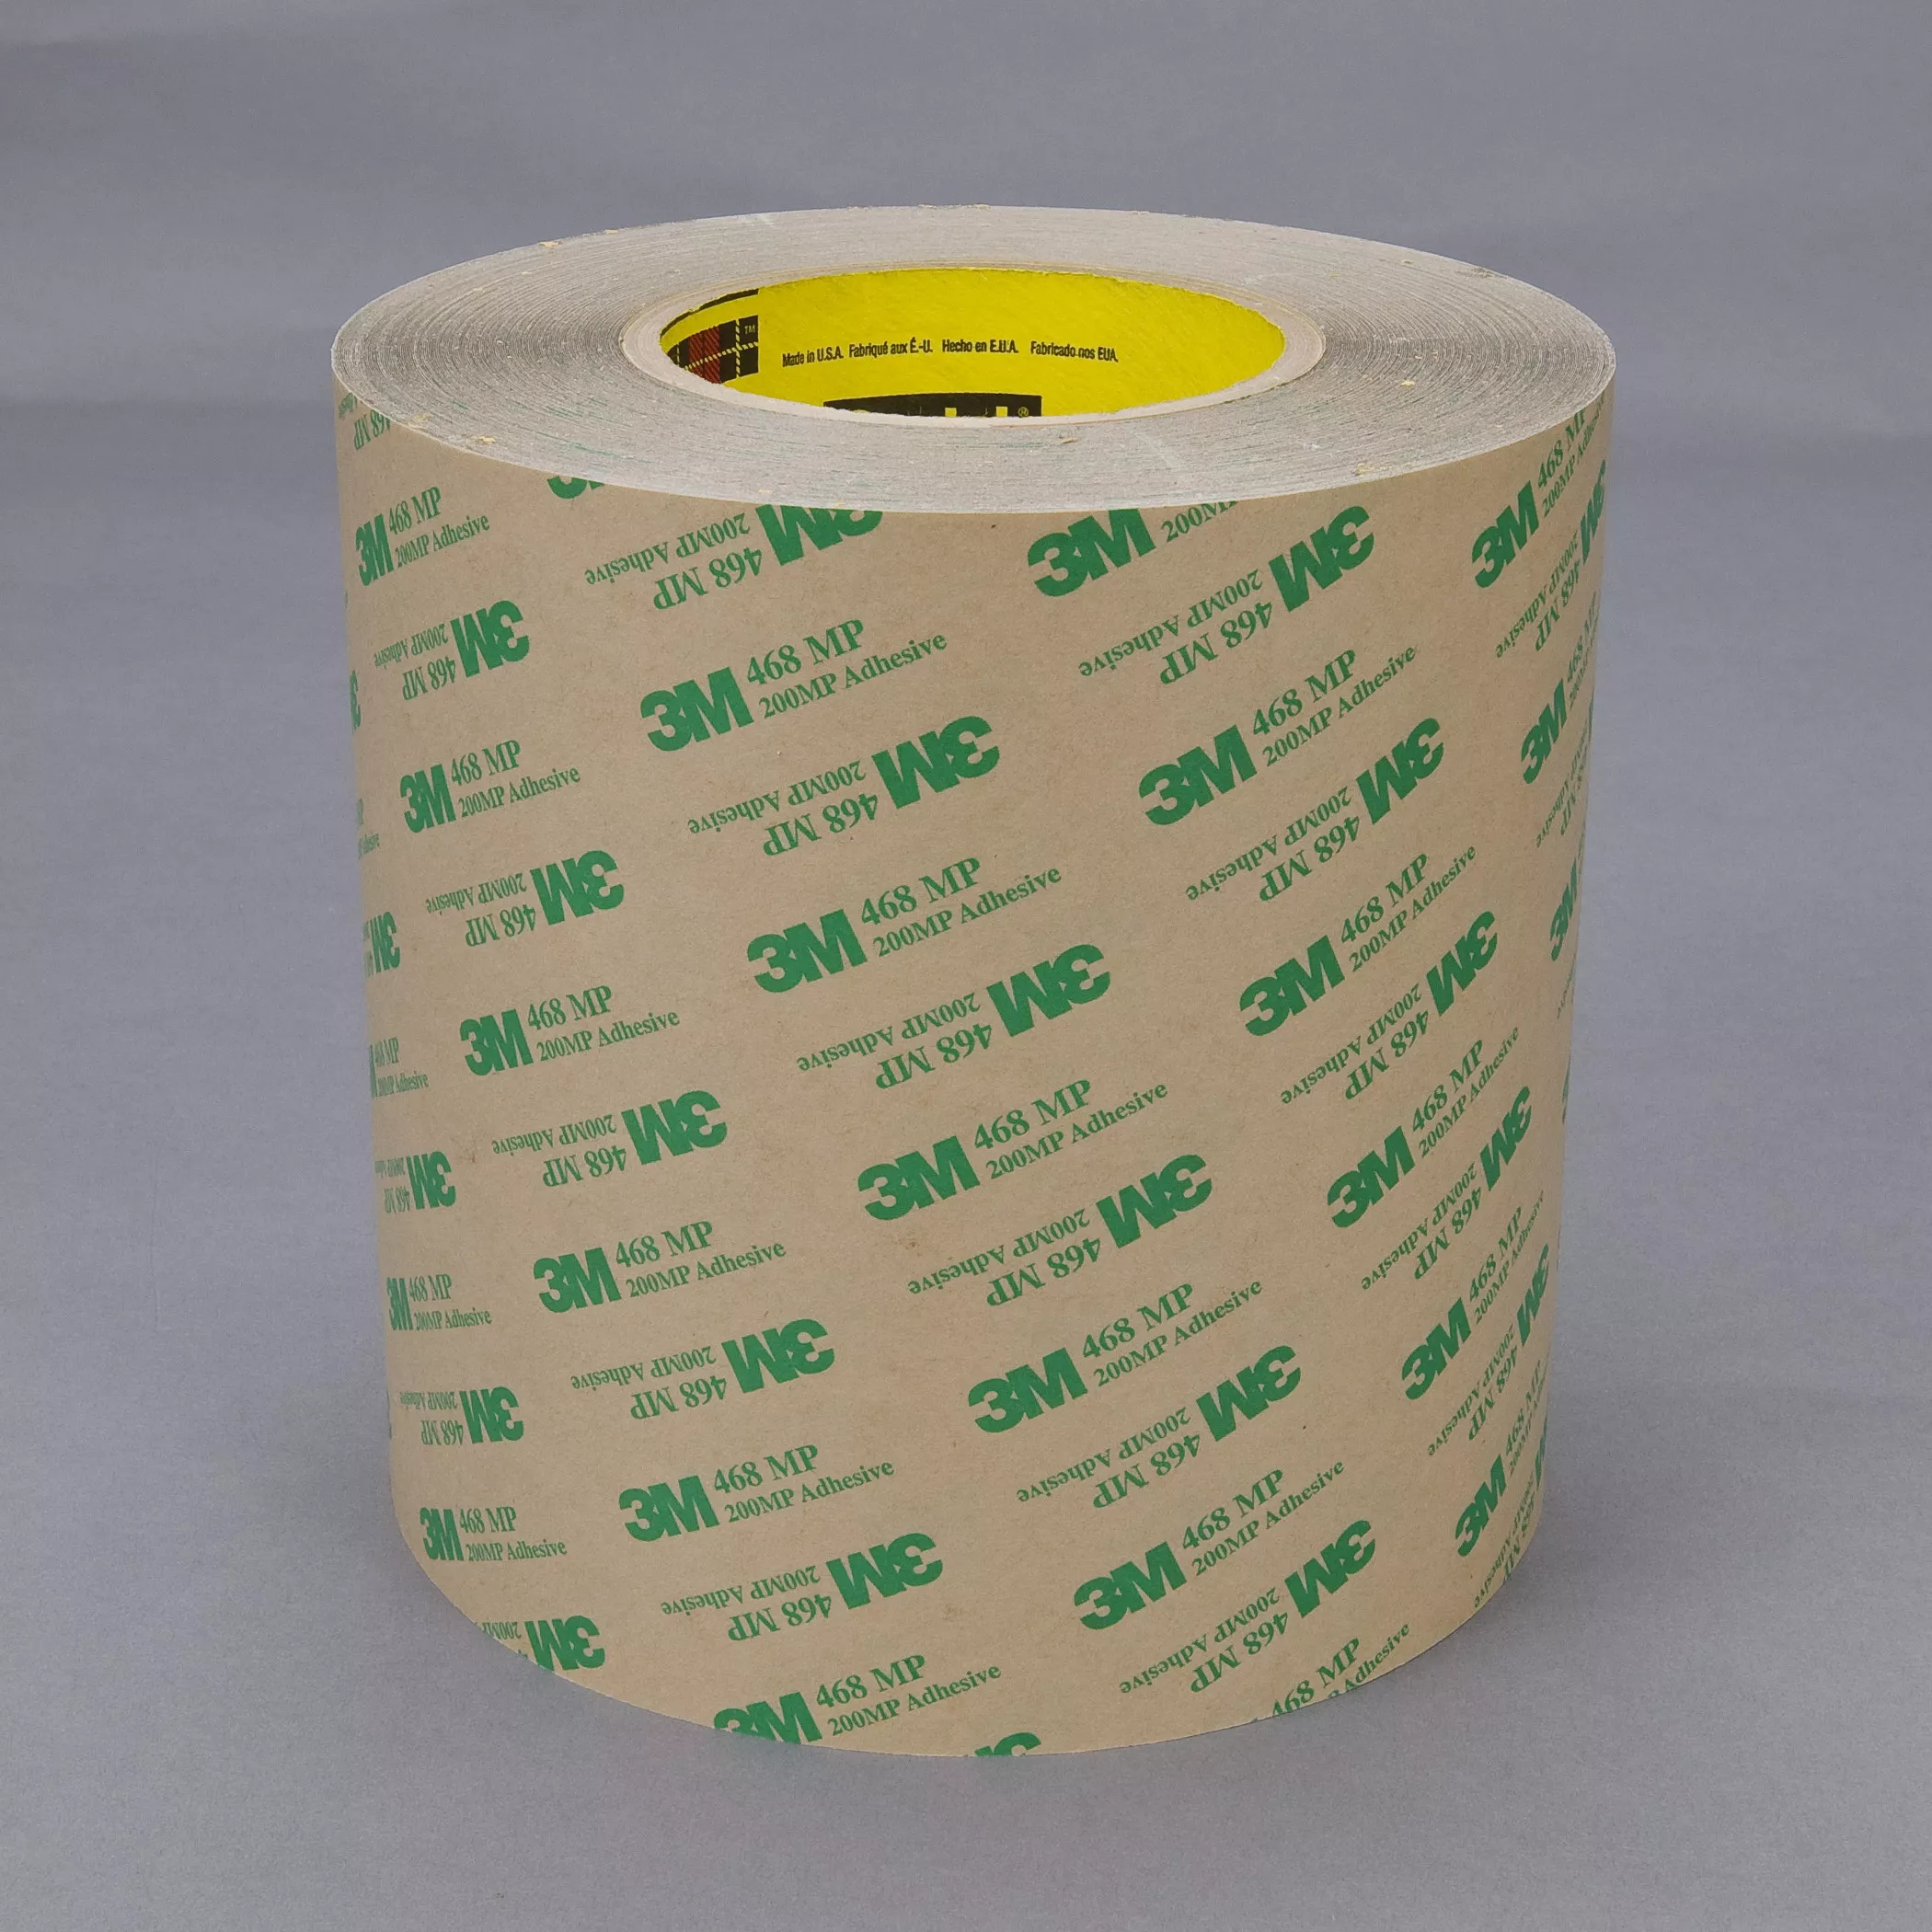 3M™ Adhesive Transfer Tape 468MP, Clear, 16 in x 60 yd, 5 mil, 1 roll
per case